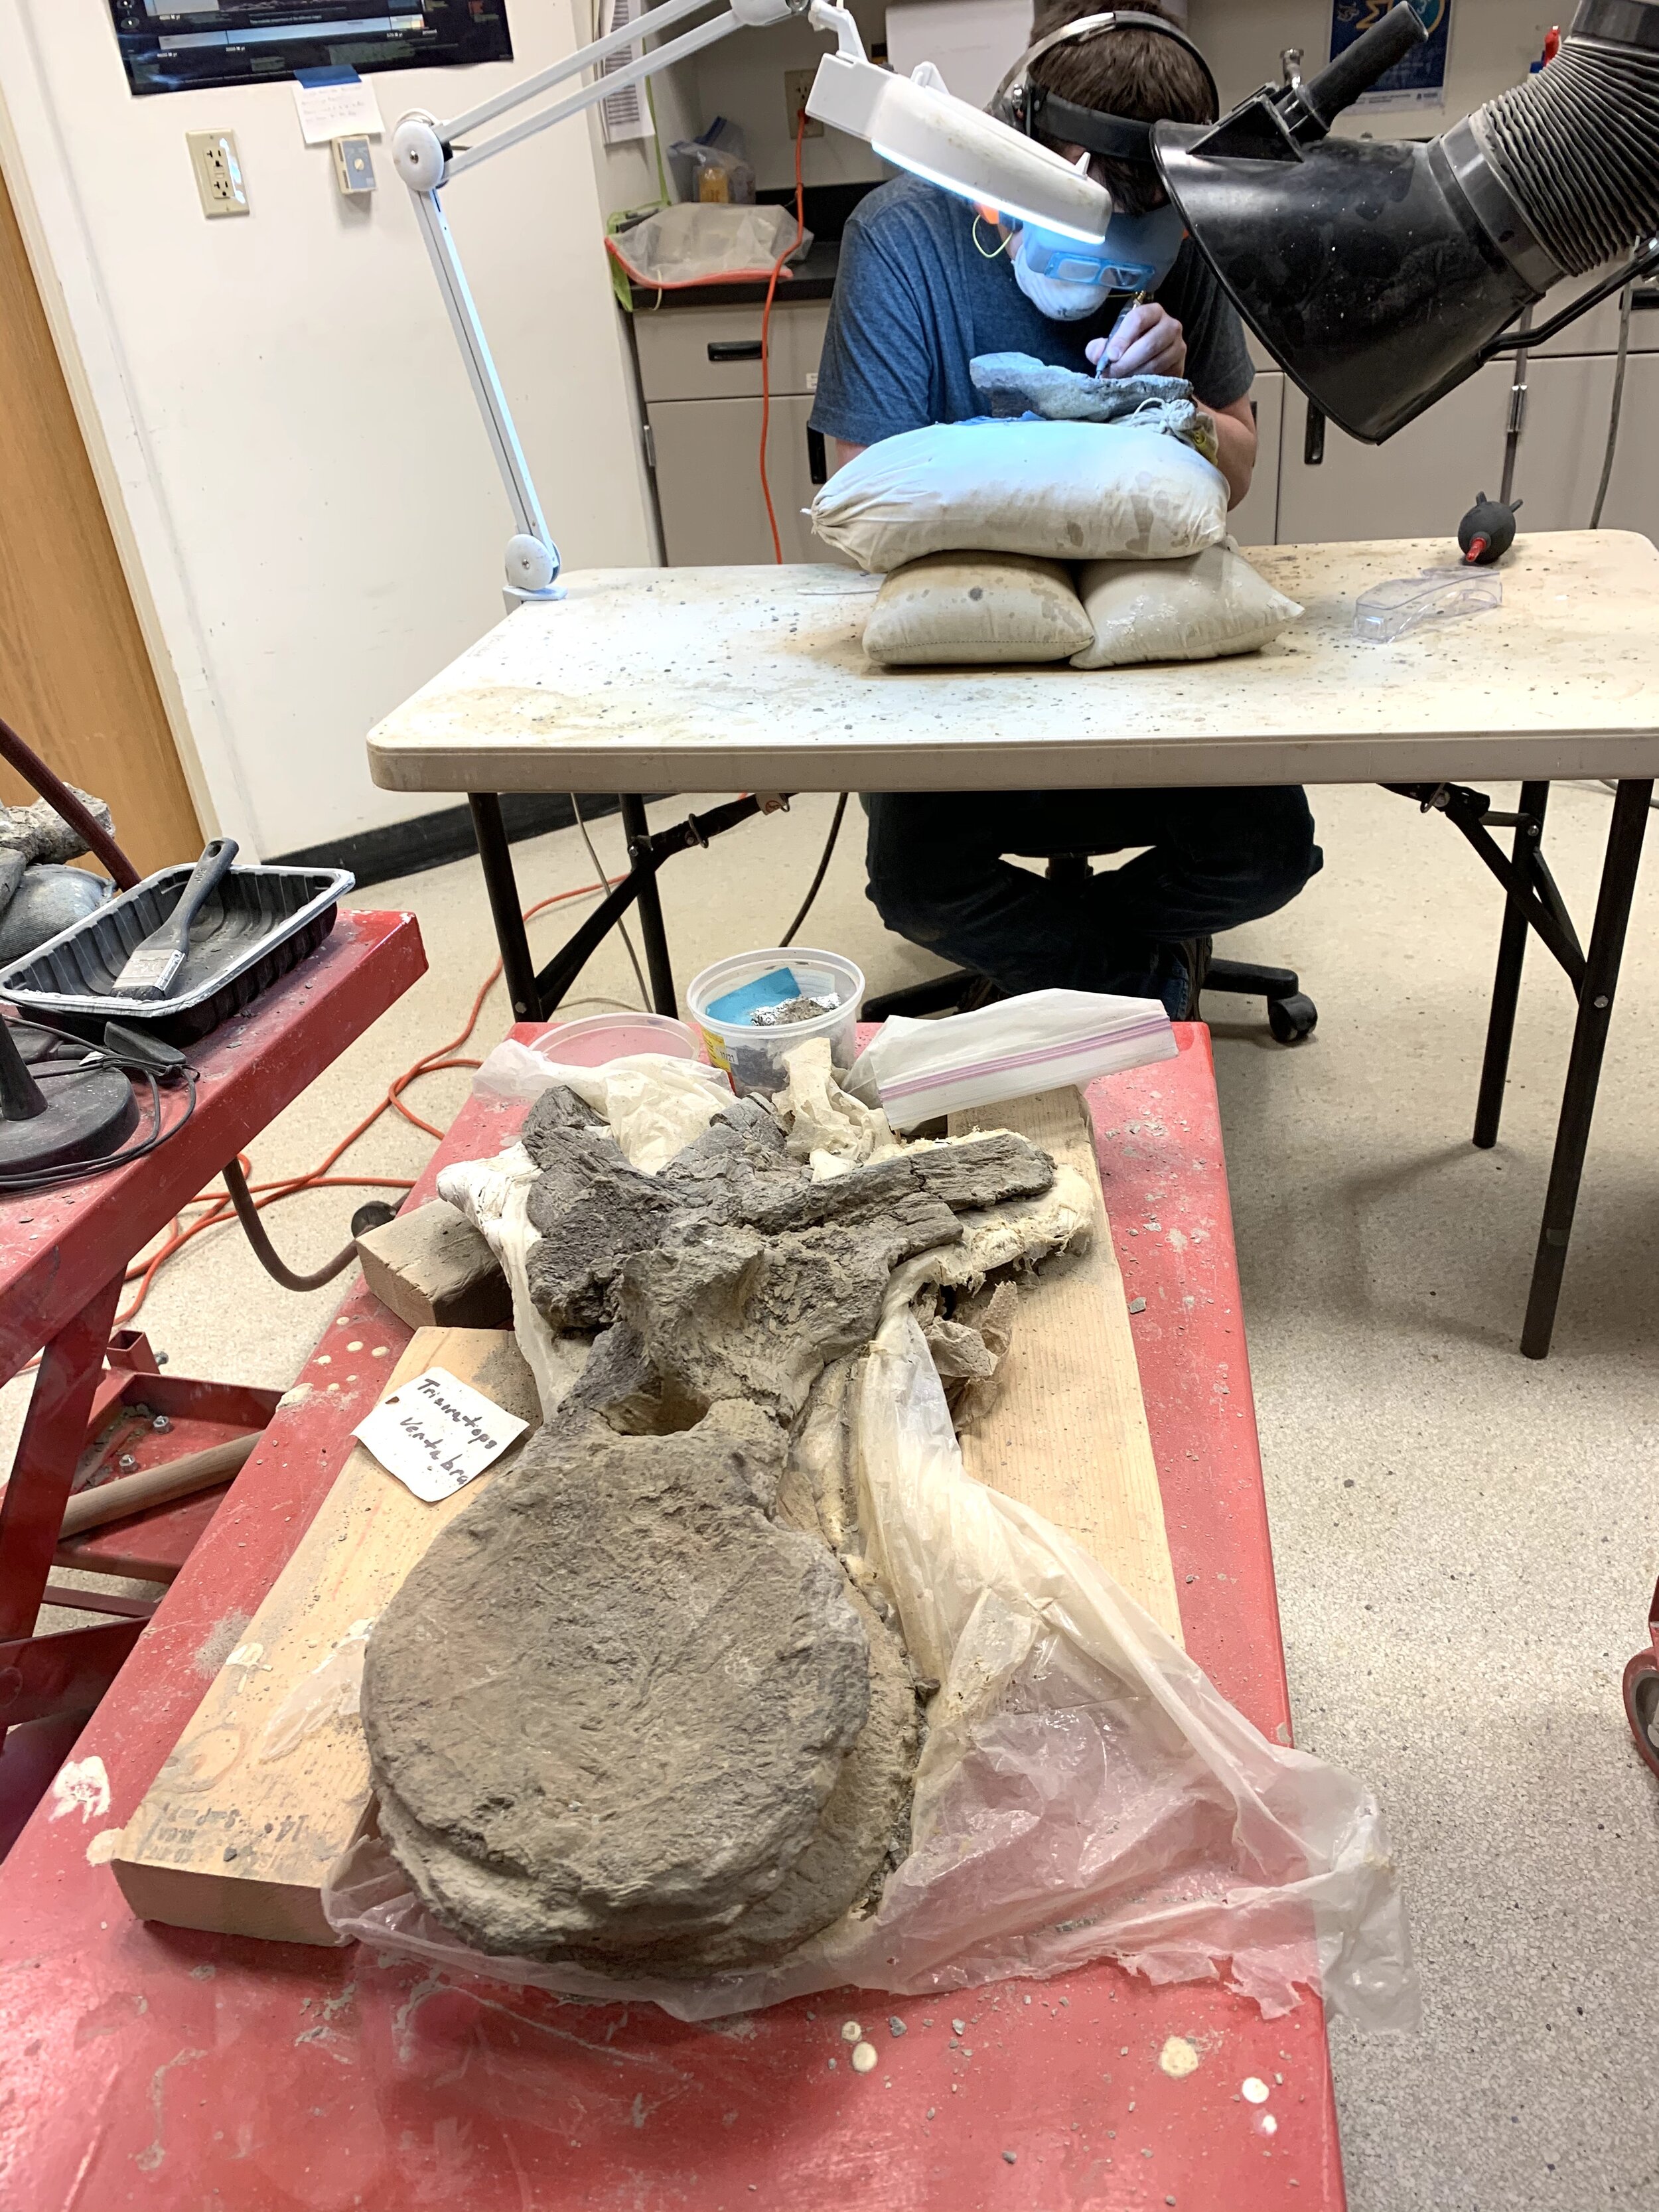  In the dinosaur complex, this Fossil Preparator had a whiteboard posted that read,  “Today I am working on a 66 million-year-old thescelosaurus tail vertebrae section. I’m also working on a 78 million-year-old hadrosaur limb bone and jaw bone.”  Wow